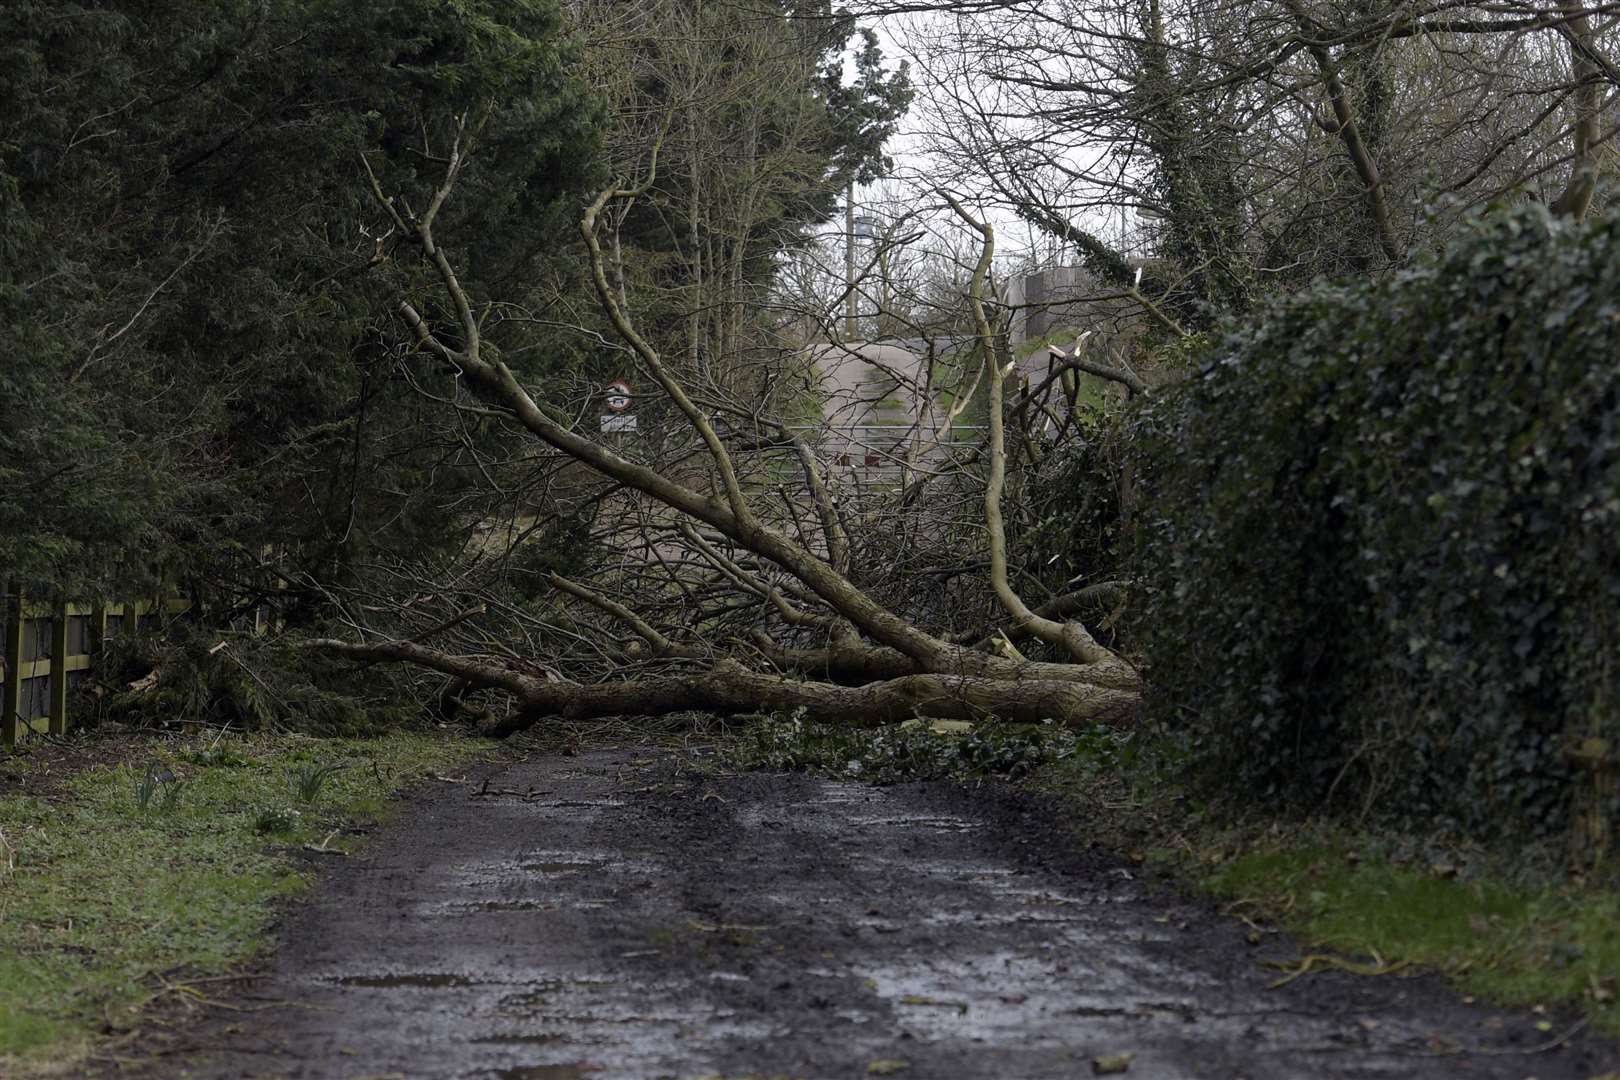 The public footpath to Westenhanger railway station was blocked. Picture: Barry Goodwin